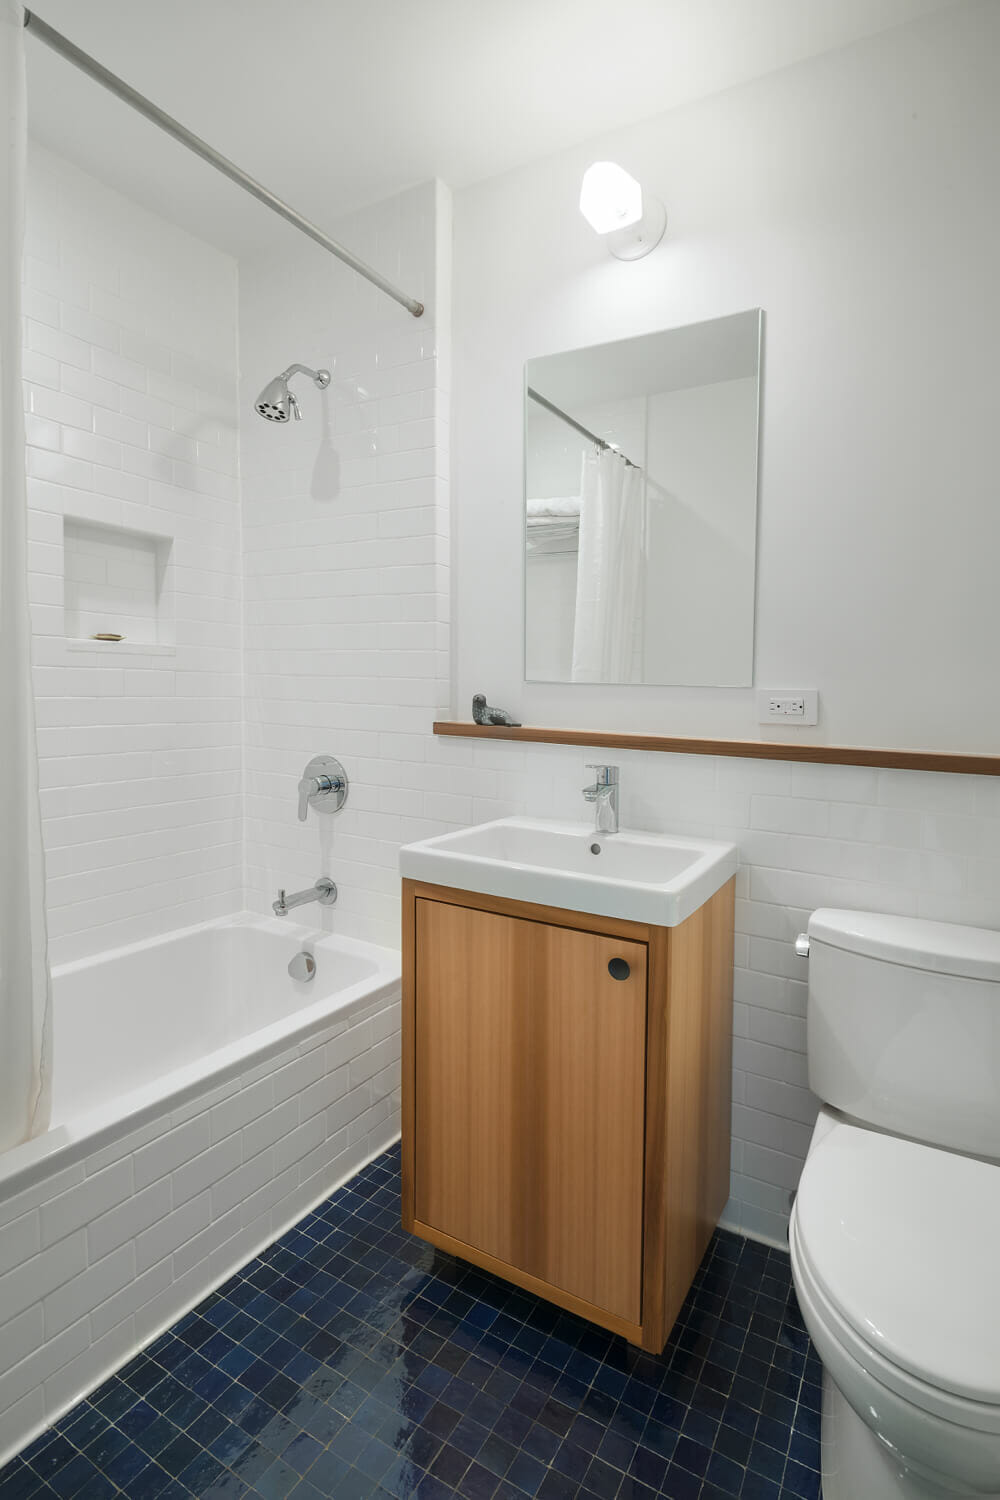 bathtub with recessed shower shelf and oak vanity with mirror and toilet and white wall tiles with wood trim and black floor tiles after renovation